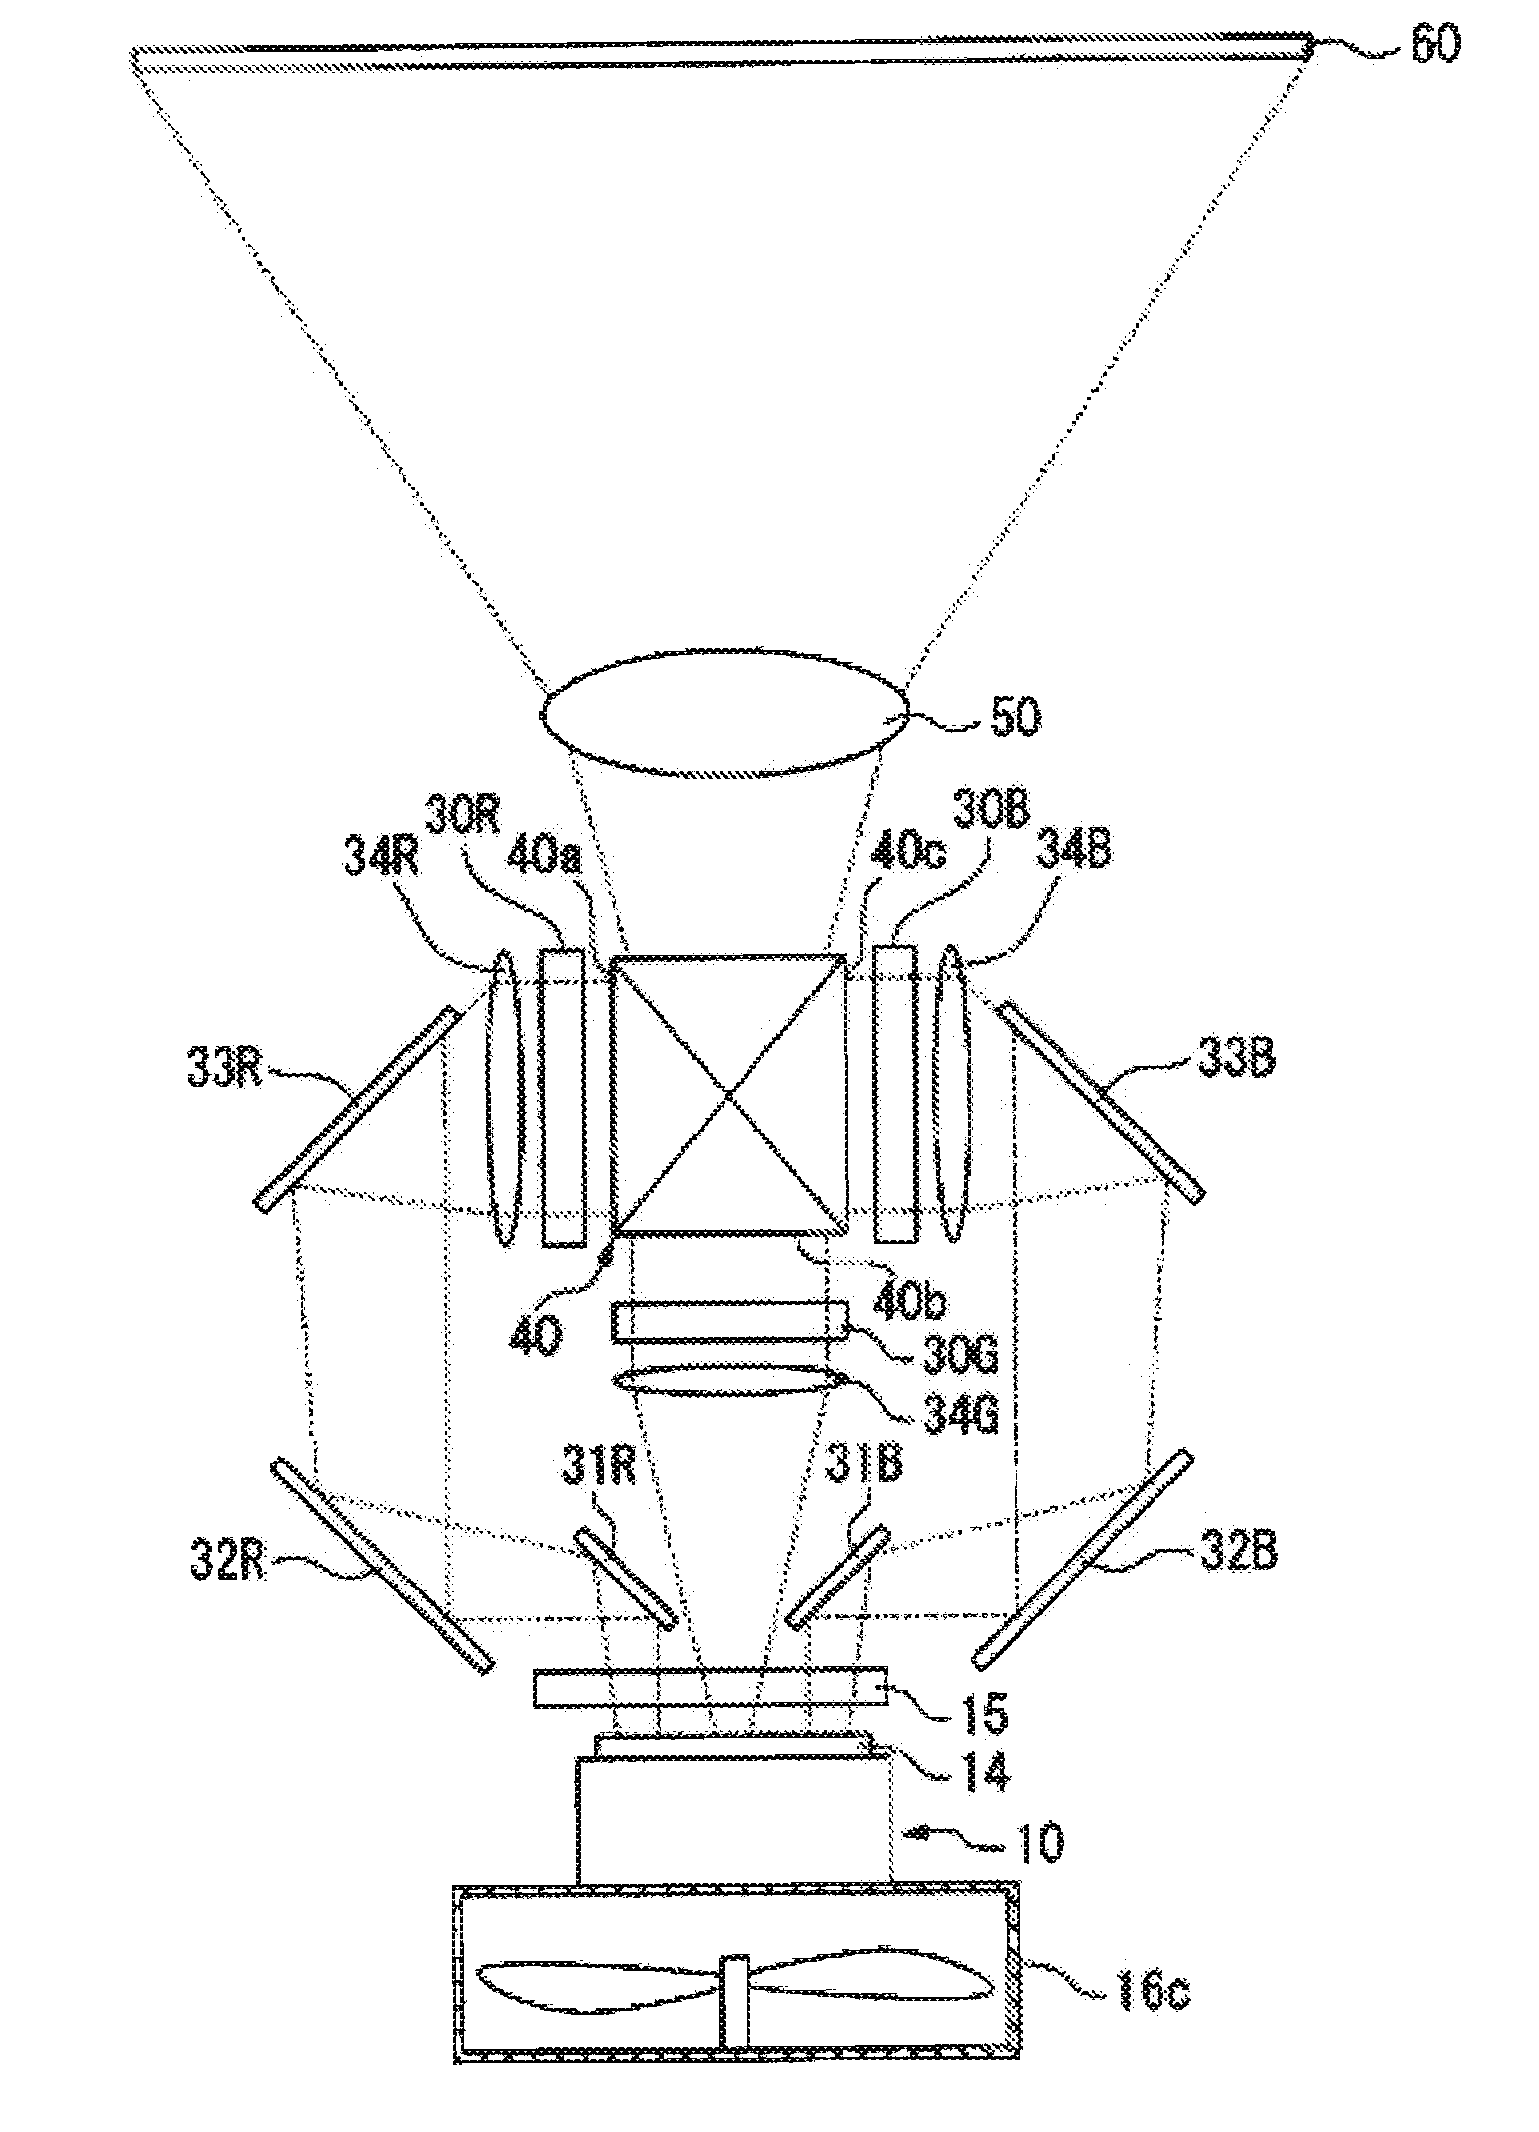 Image display apparatus and light source unit